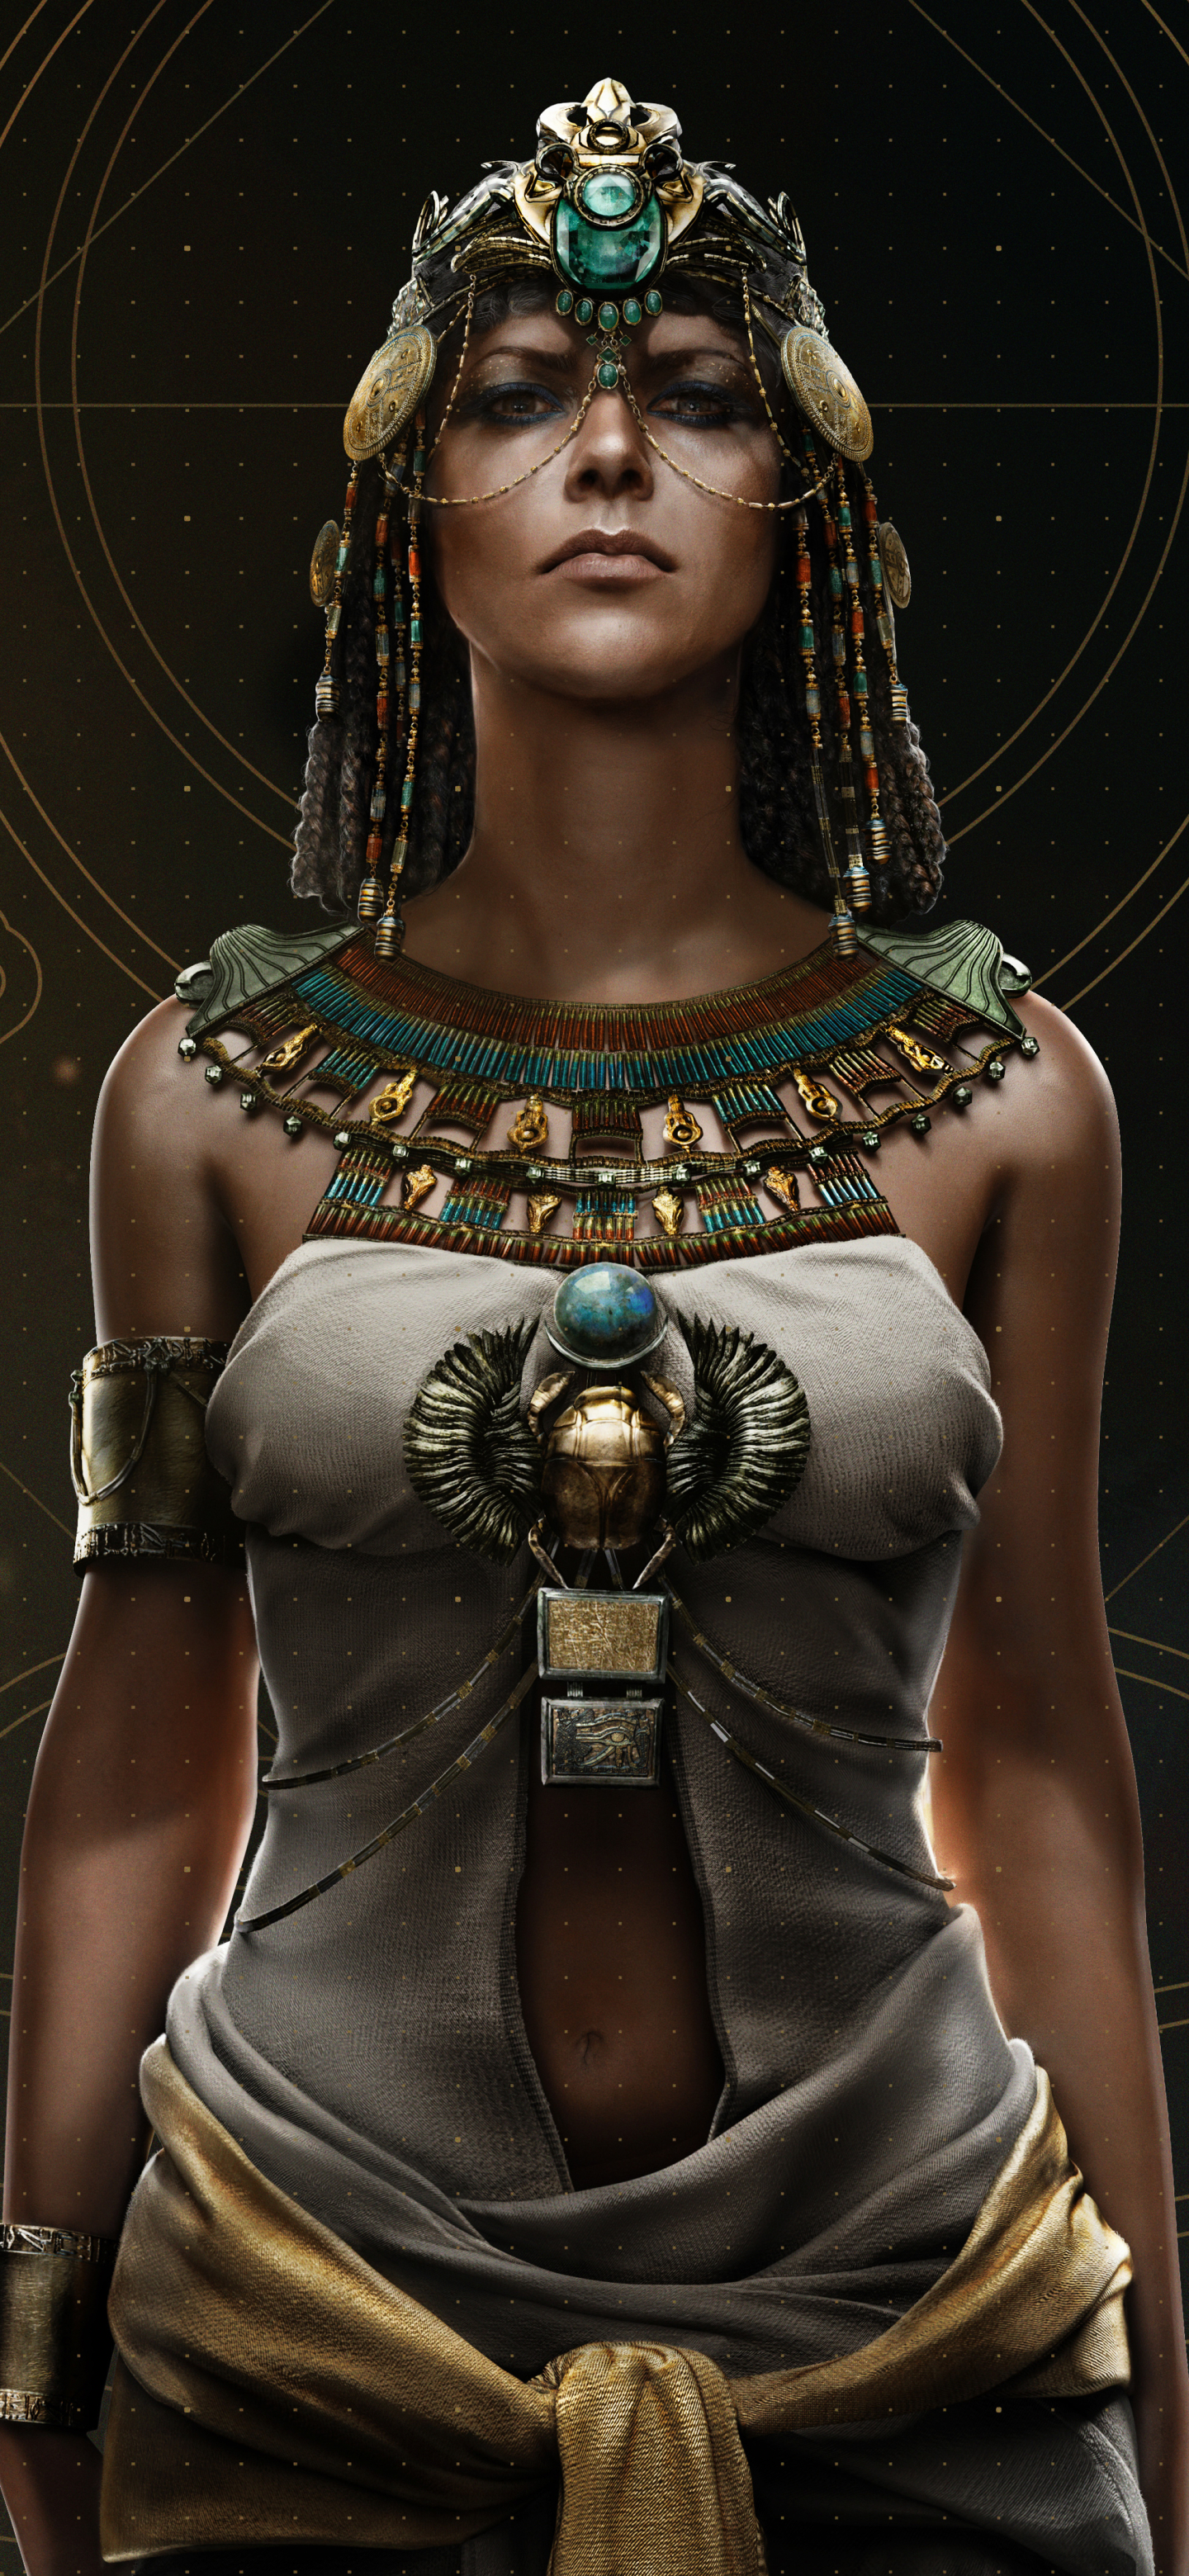 cleopatra, video game, assassin's creed origins, assassin's creed Free Stock Photo